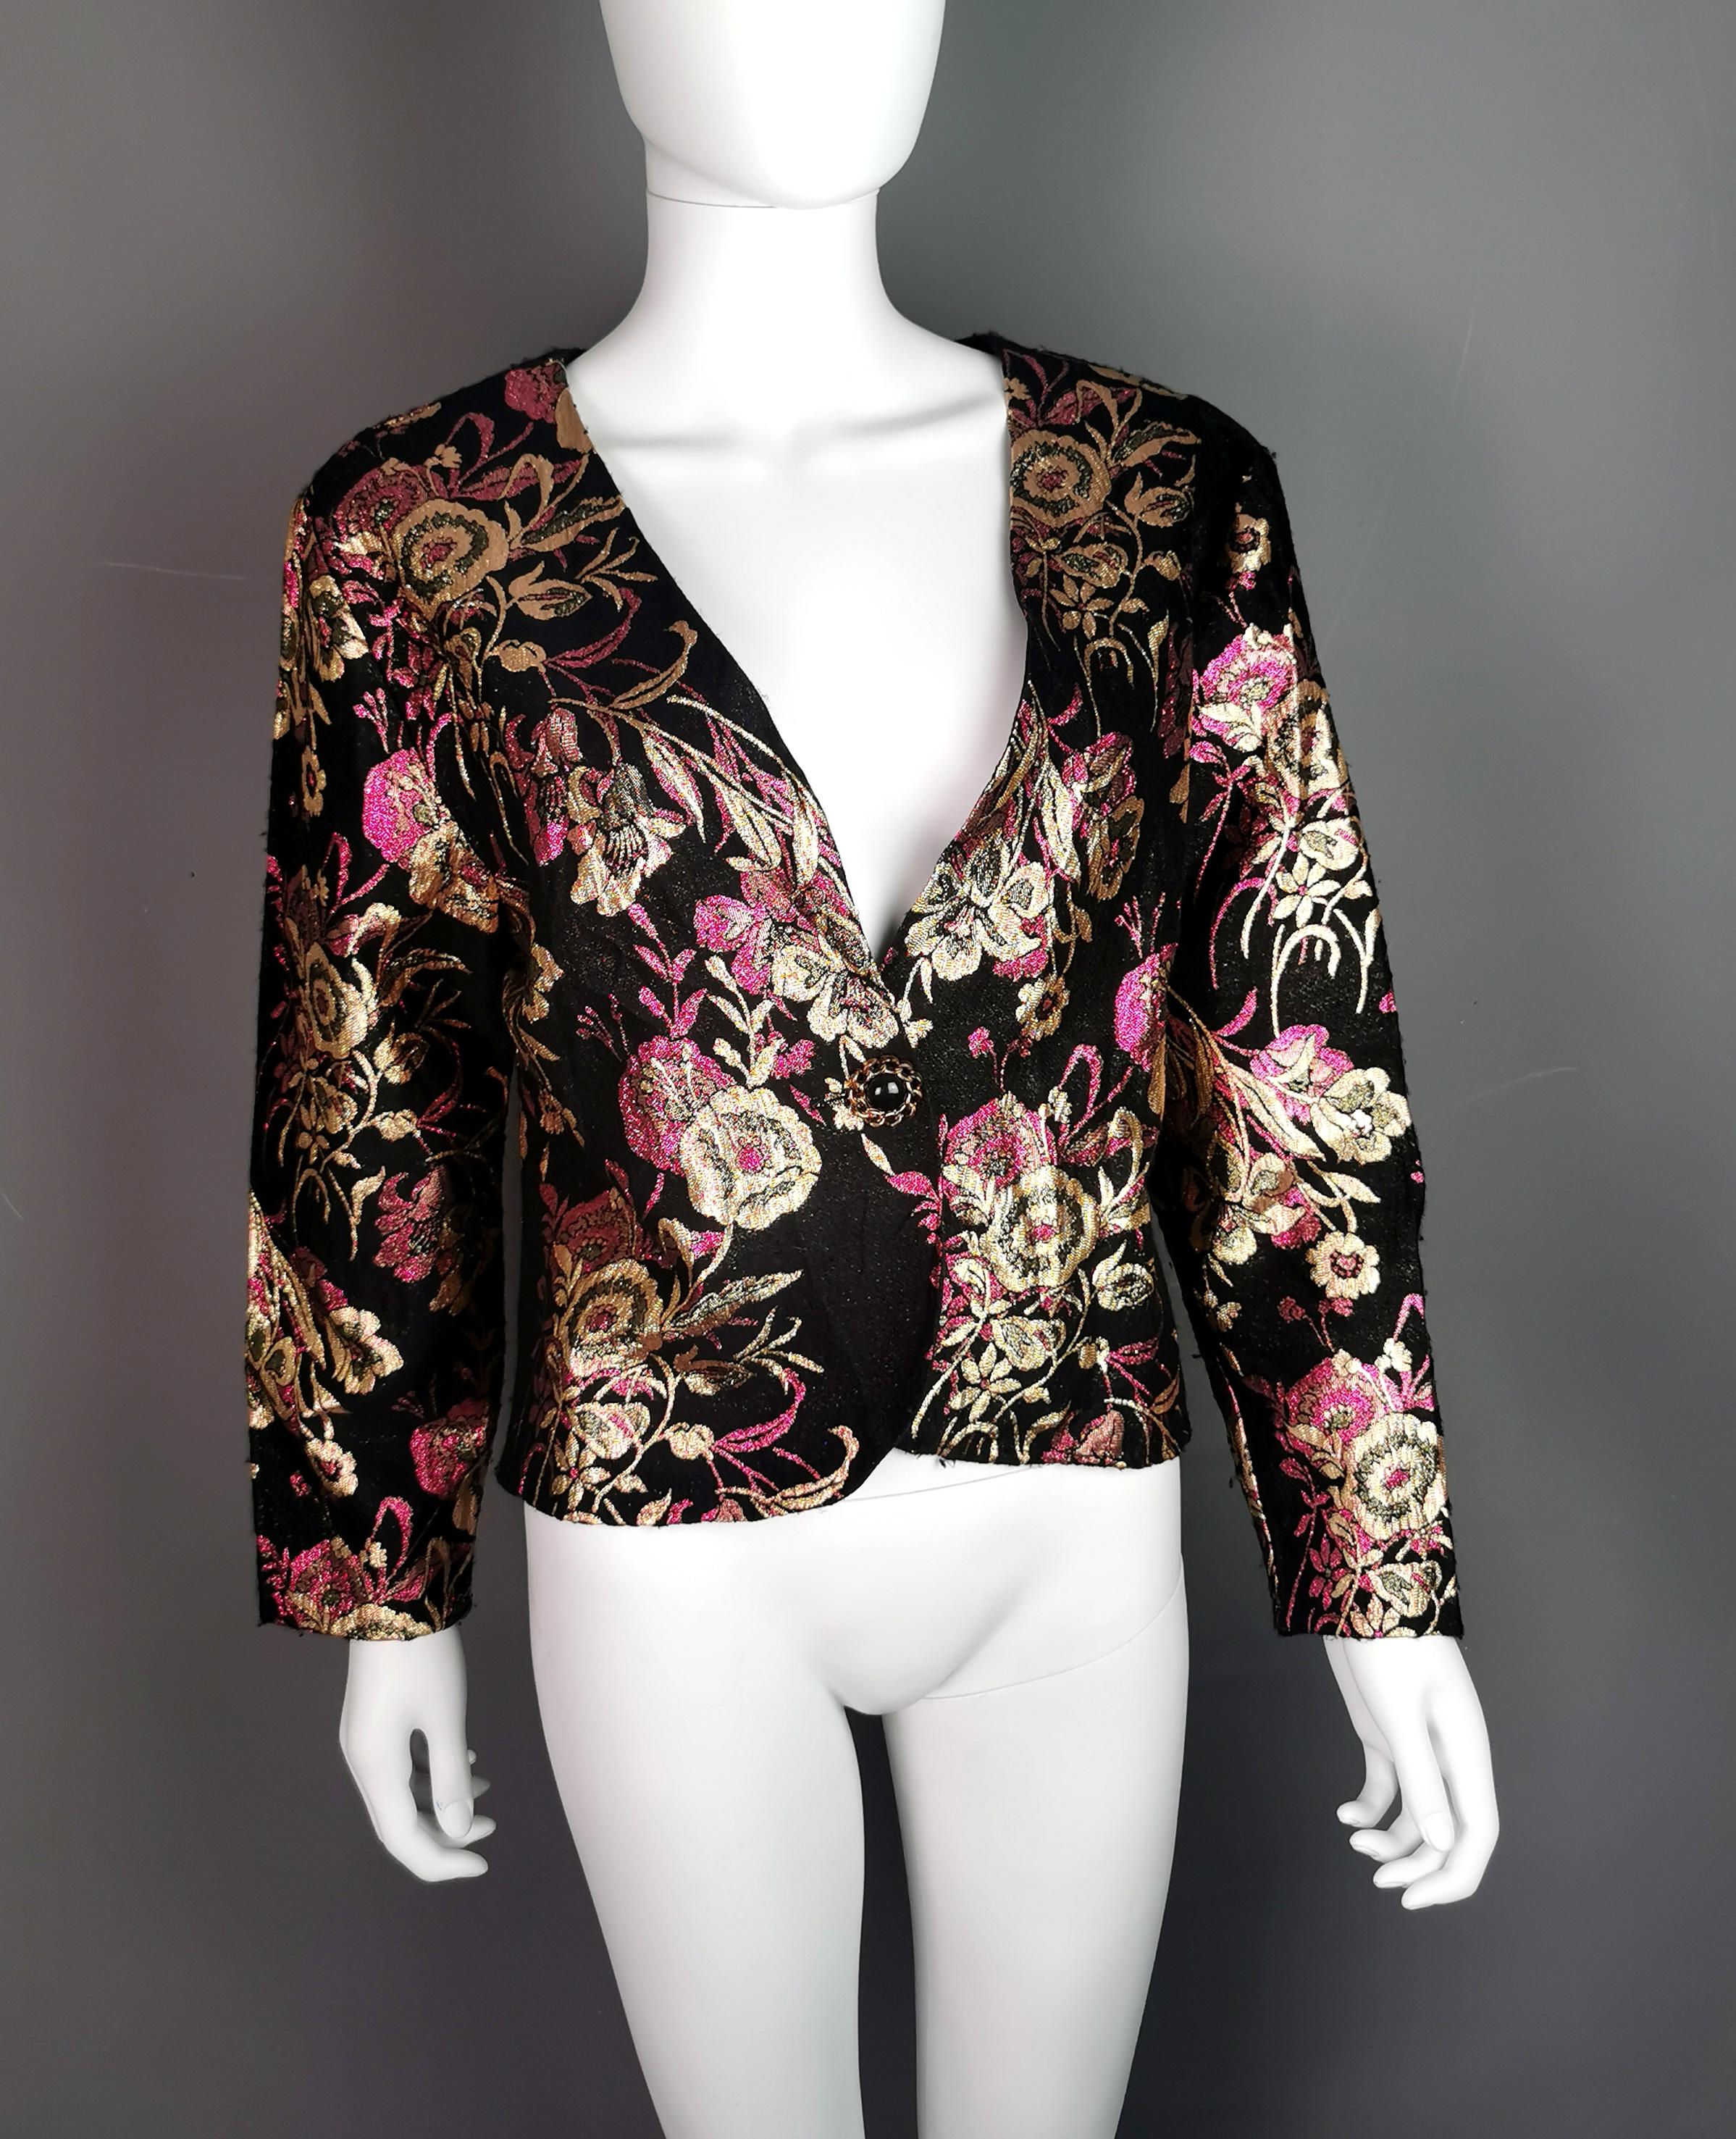 A unique vintage c1980s cropped length Brocade jacket.

It has a black ground with metallic gold and fuschia pink floral Brocade.

The jacket is a shorter length with long sleeves and fastens at the fringe with a single plastic button.

A perfect